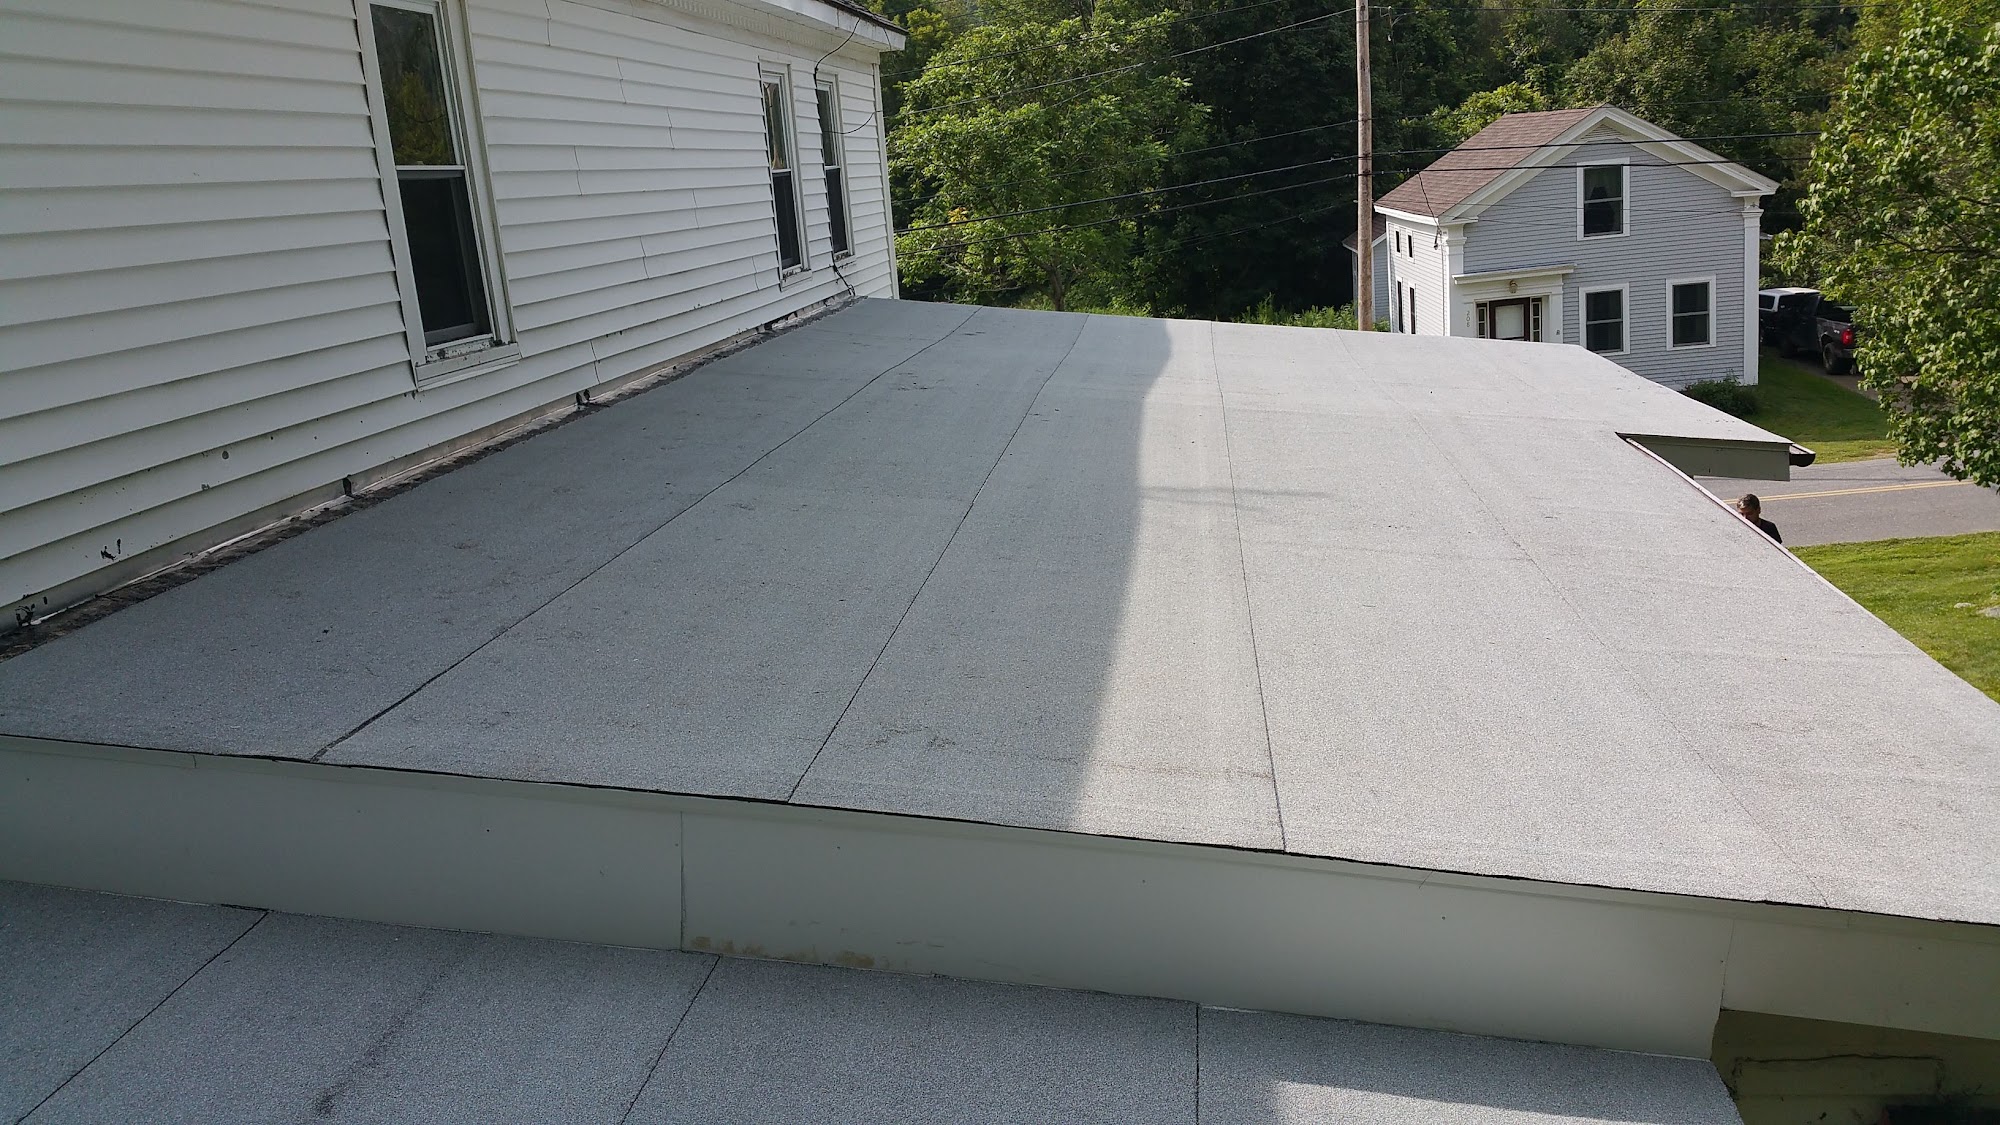 Klaus Roofing Systems by J Smegal 449 Pittsfield Rd # 201, Lenox Massachusetts 01240